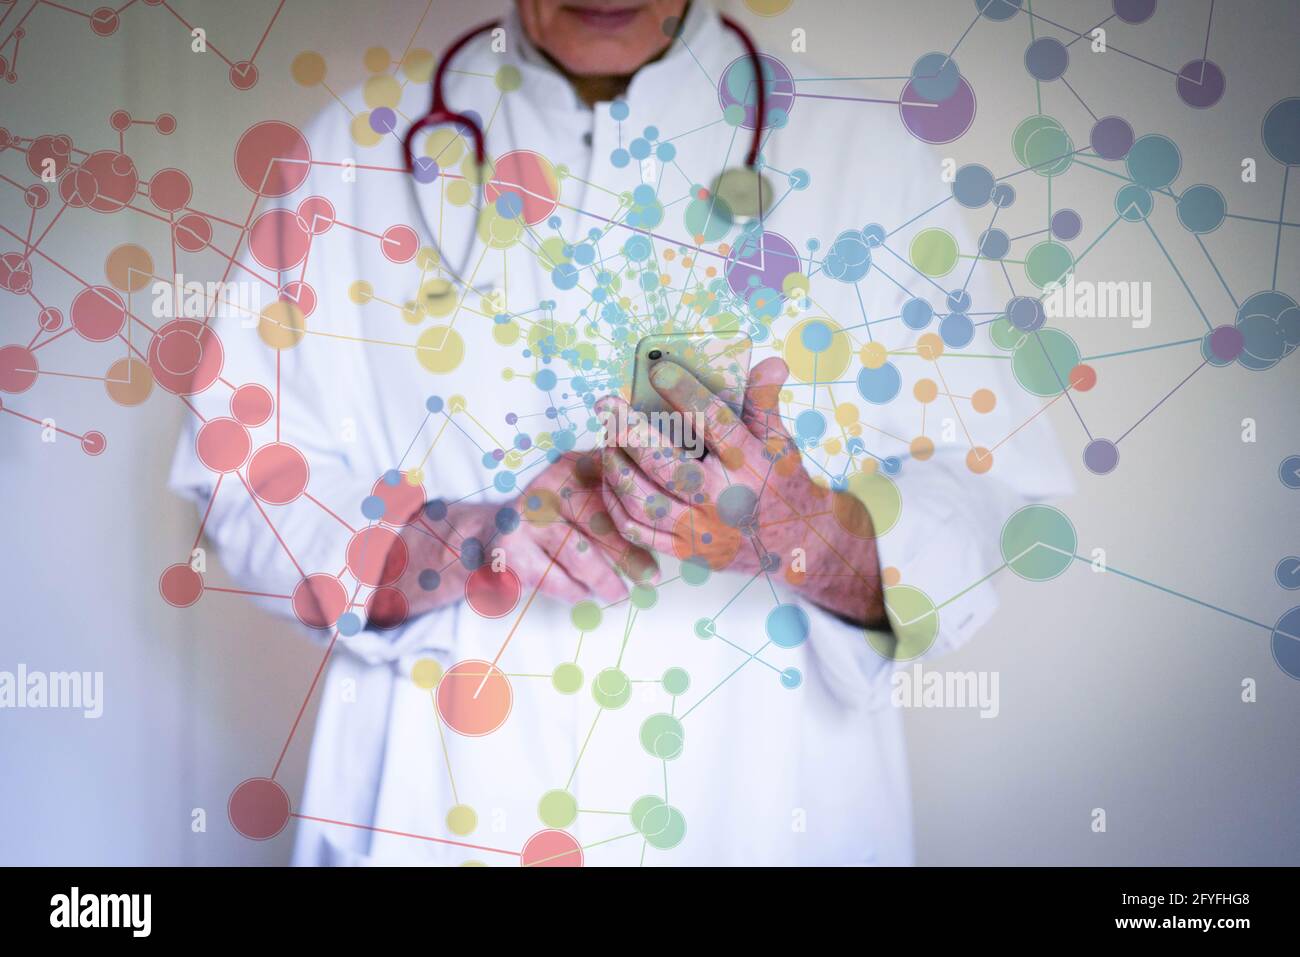 Conceptual image of network and doctor. Stock Photo